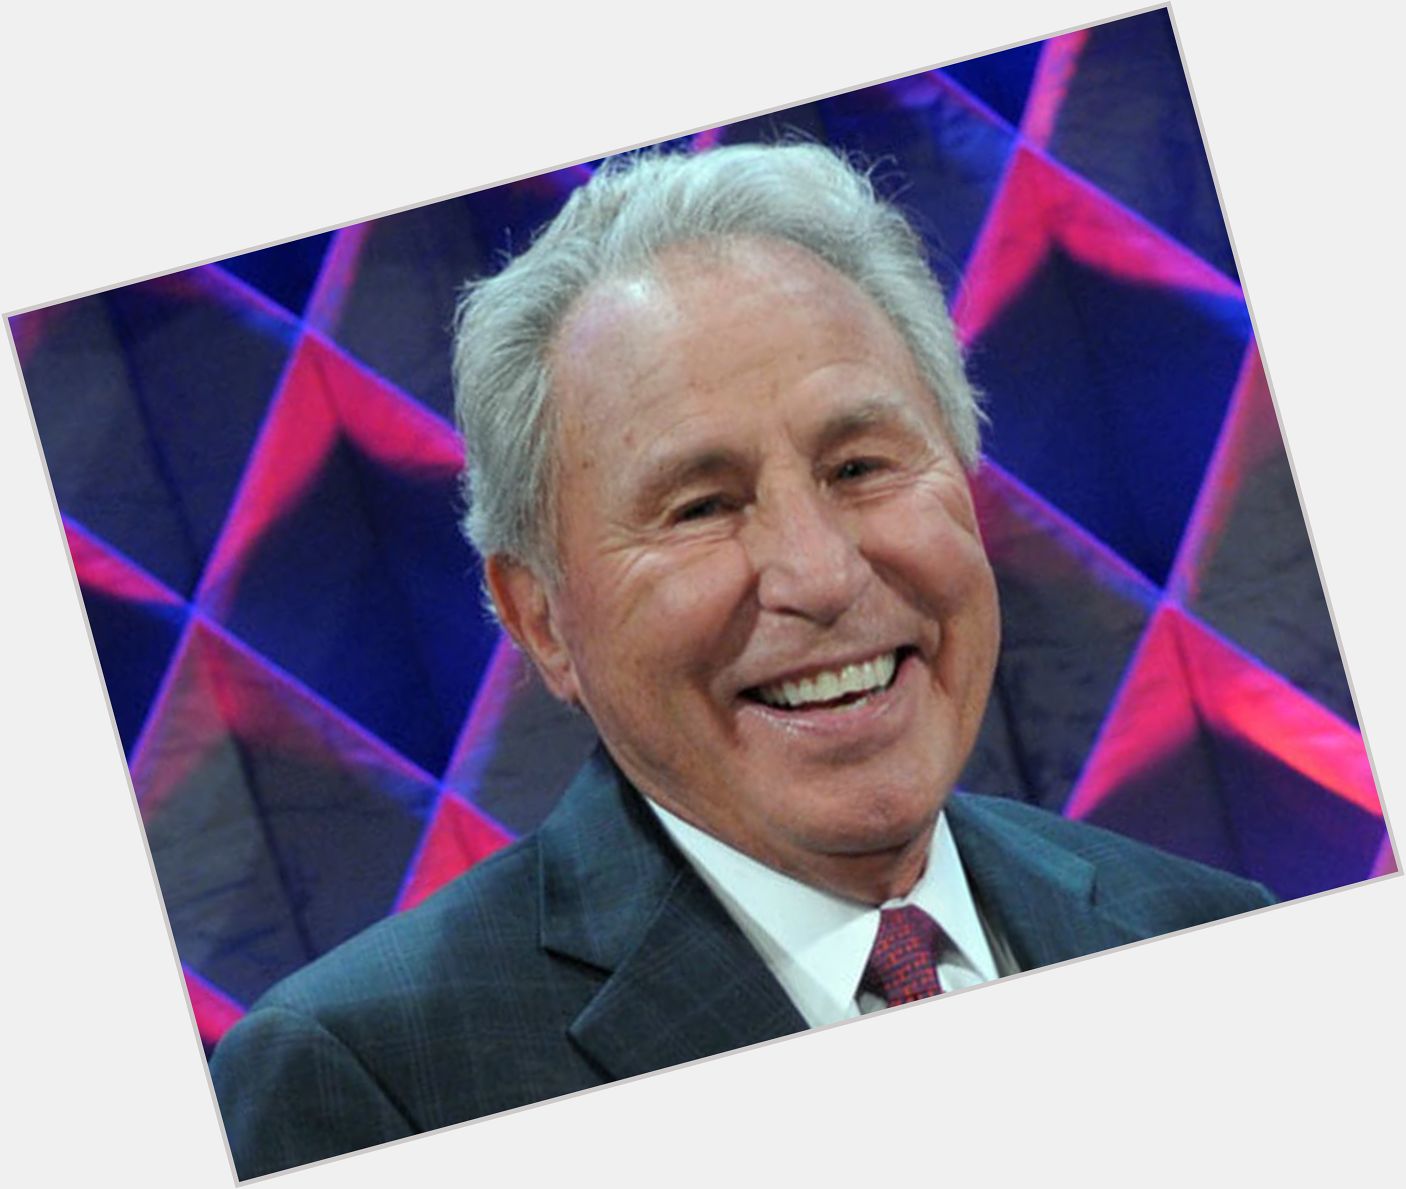 Please join us in wishing a very happy birthday to Lee Corso - Class of 2012 